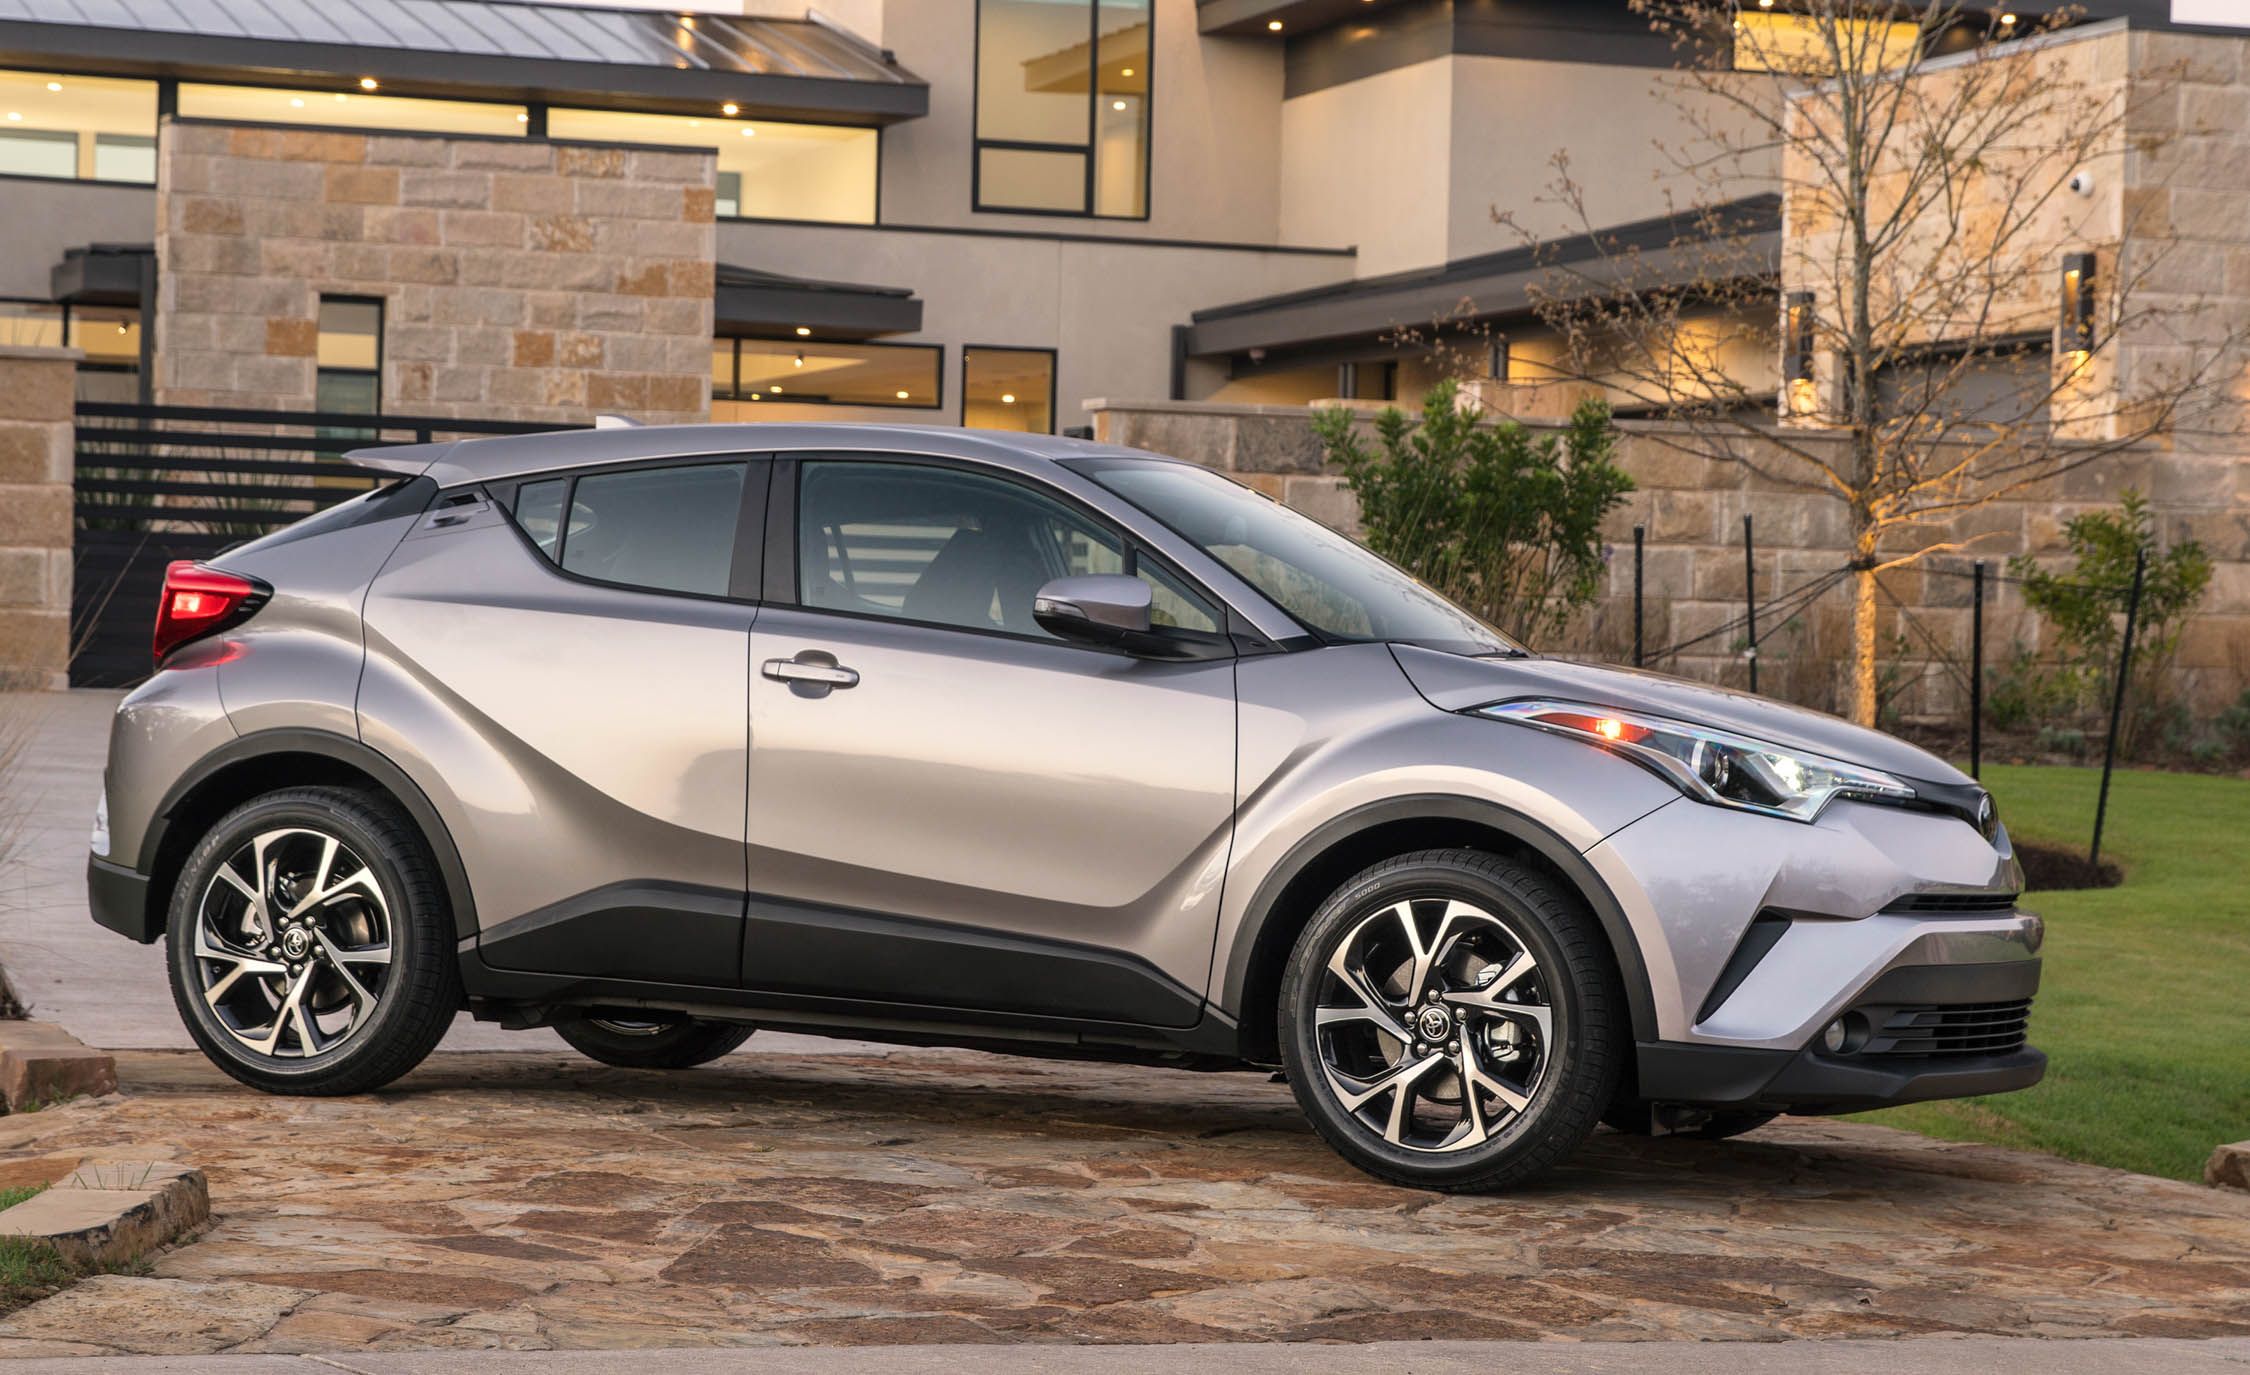 2018 Toyota C HR Silver Metallic Exterior Front And Side (View 19 of 33)